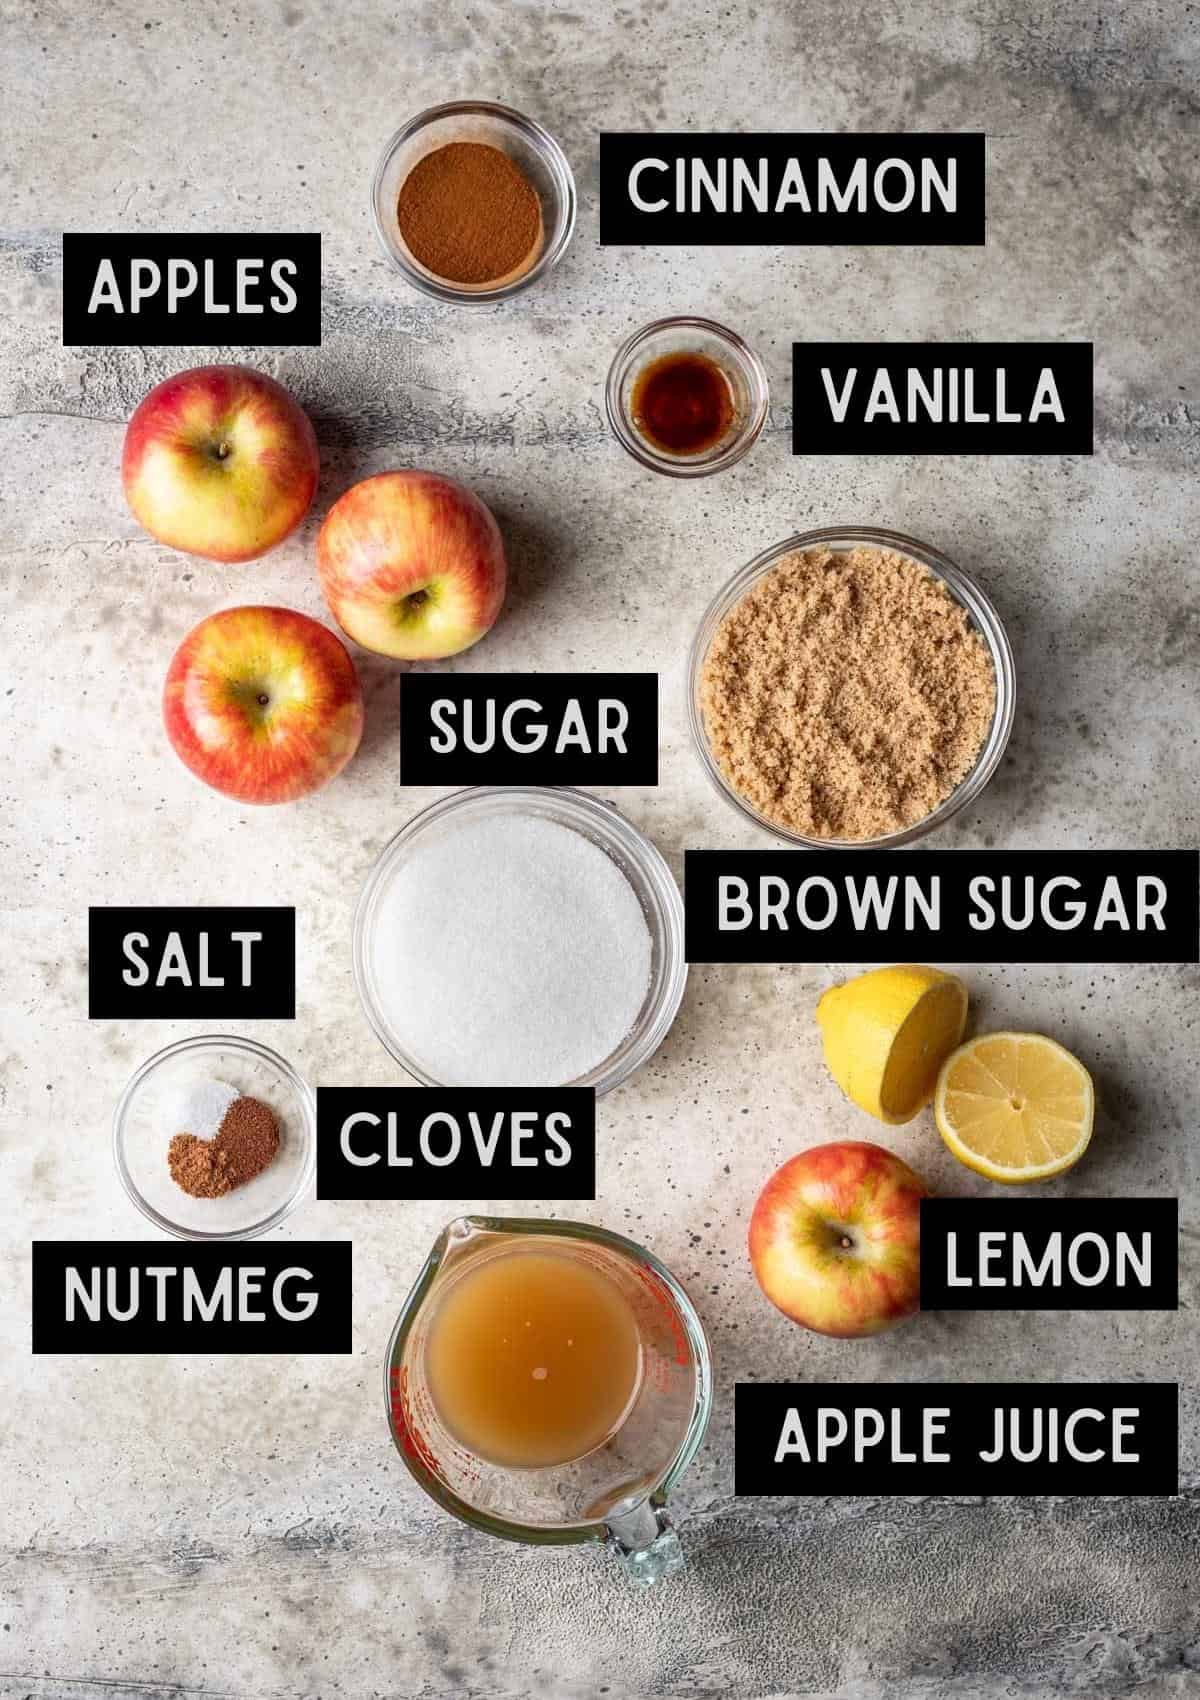 Labelled ingredients for instant pot apple butter (see recipe for details).